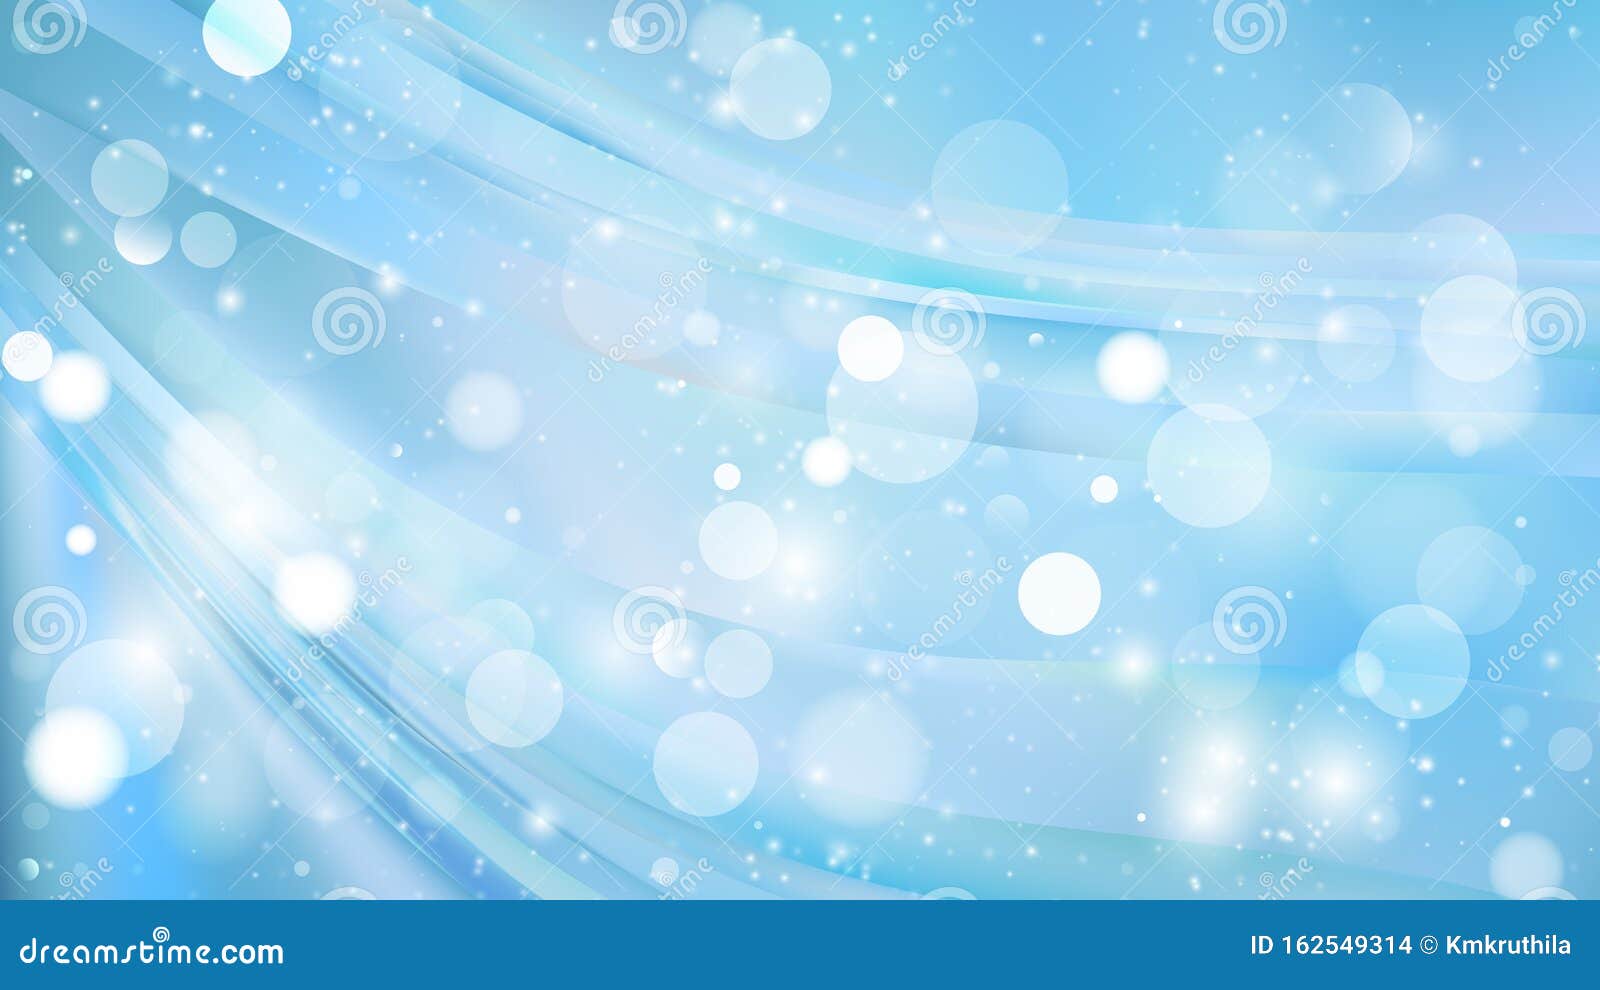 Abstract Baby Blue Blur Lights Background Stock Vector - Illustration of  effect, magic: 162549314